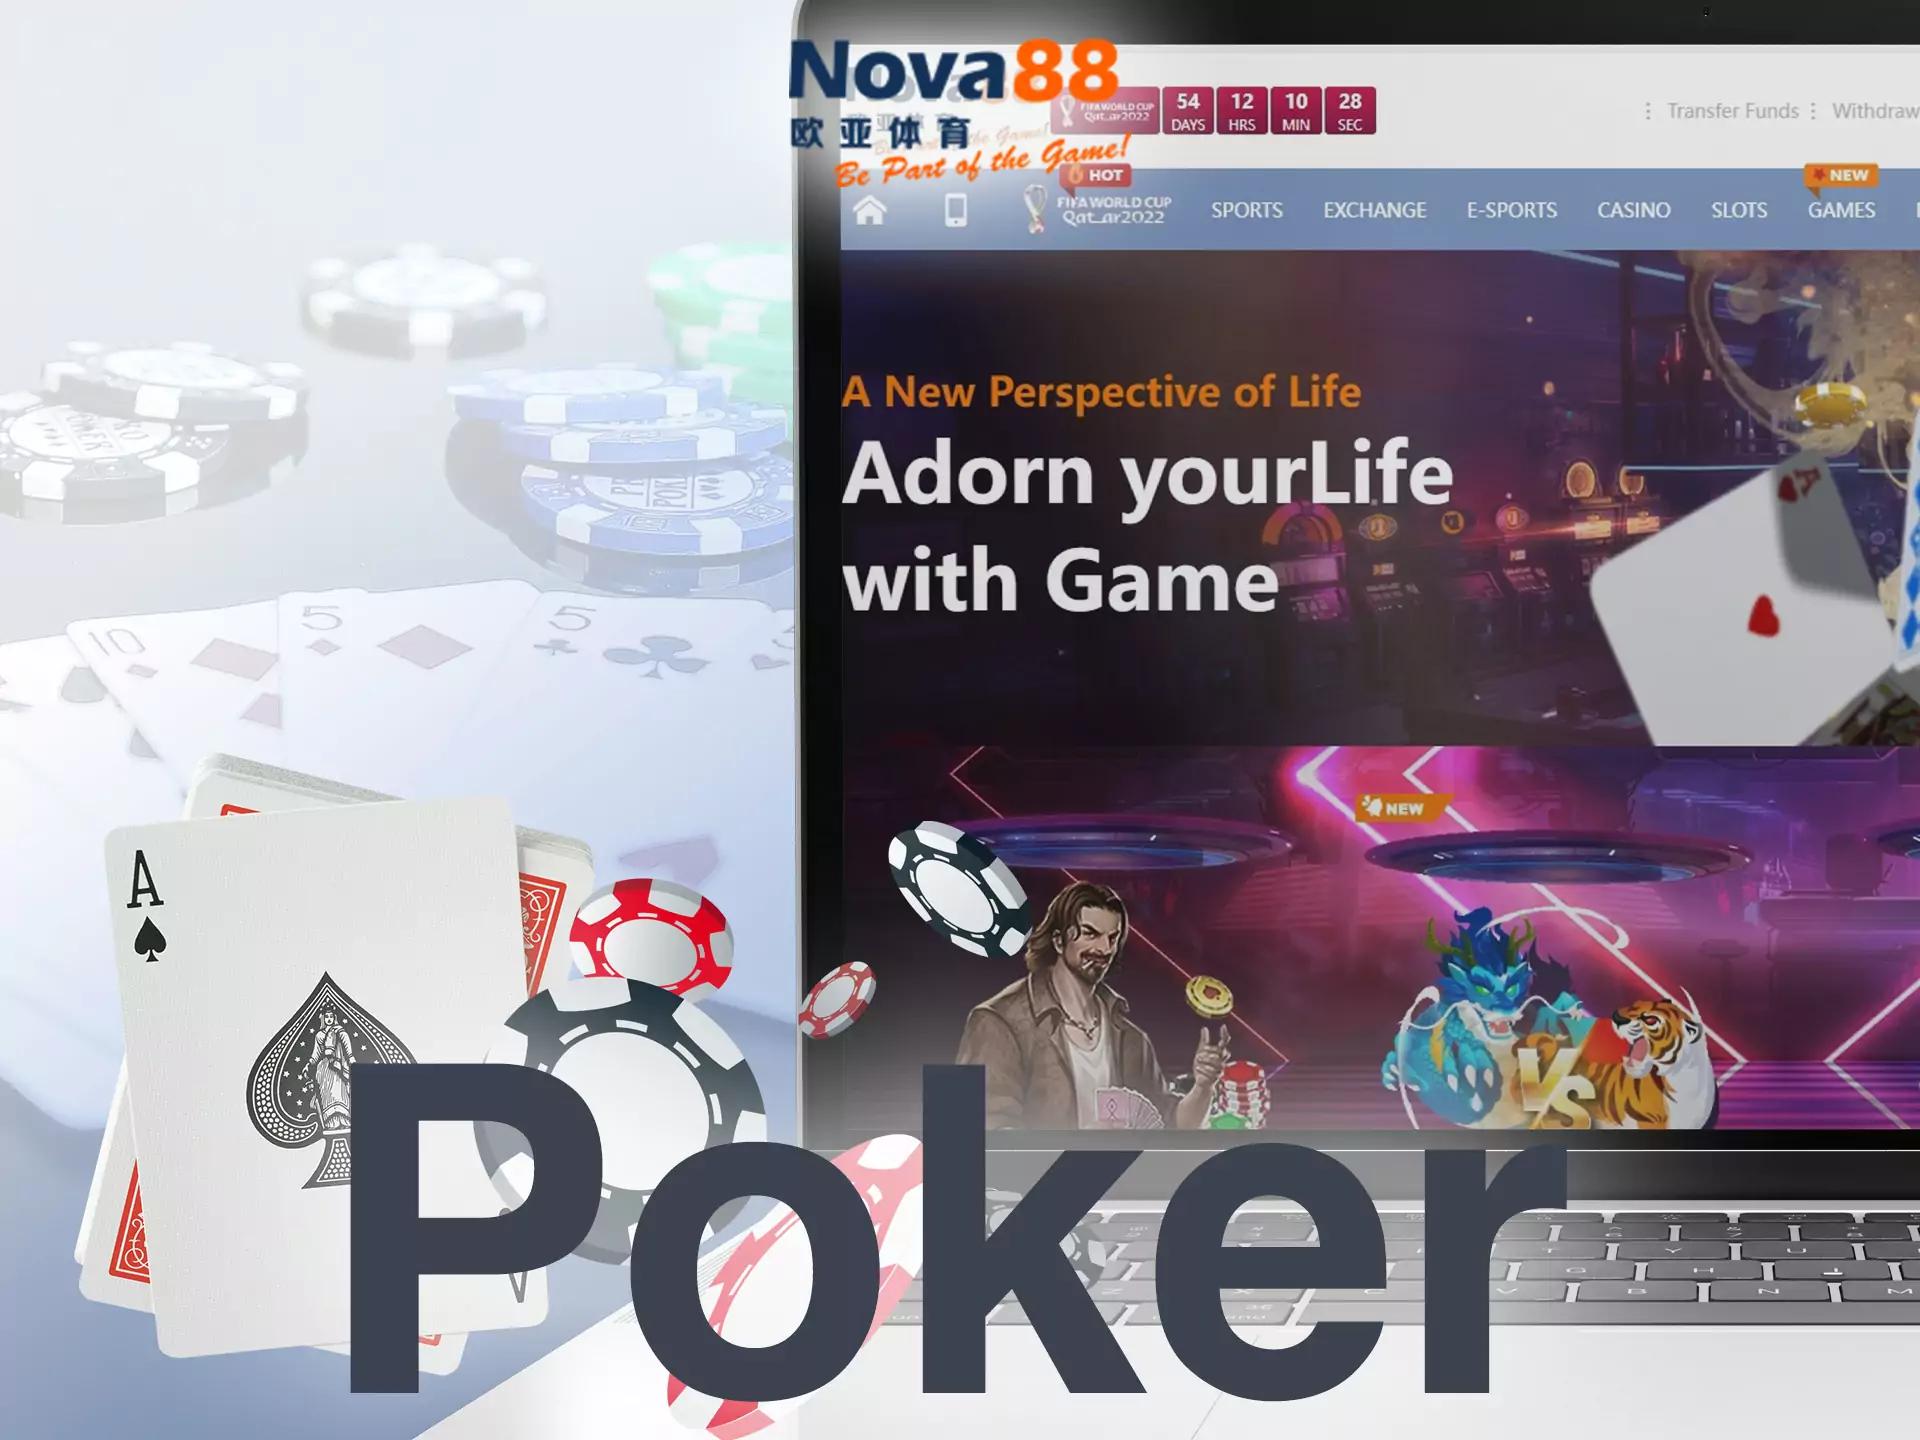 In the Nova88 live casino, you can play poker.